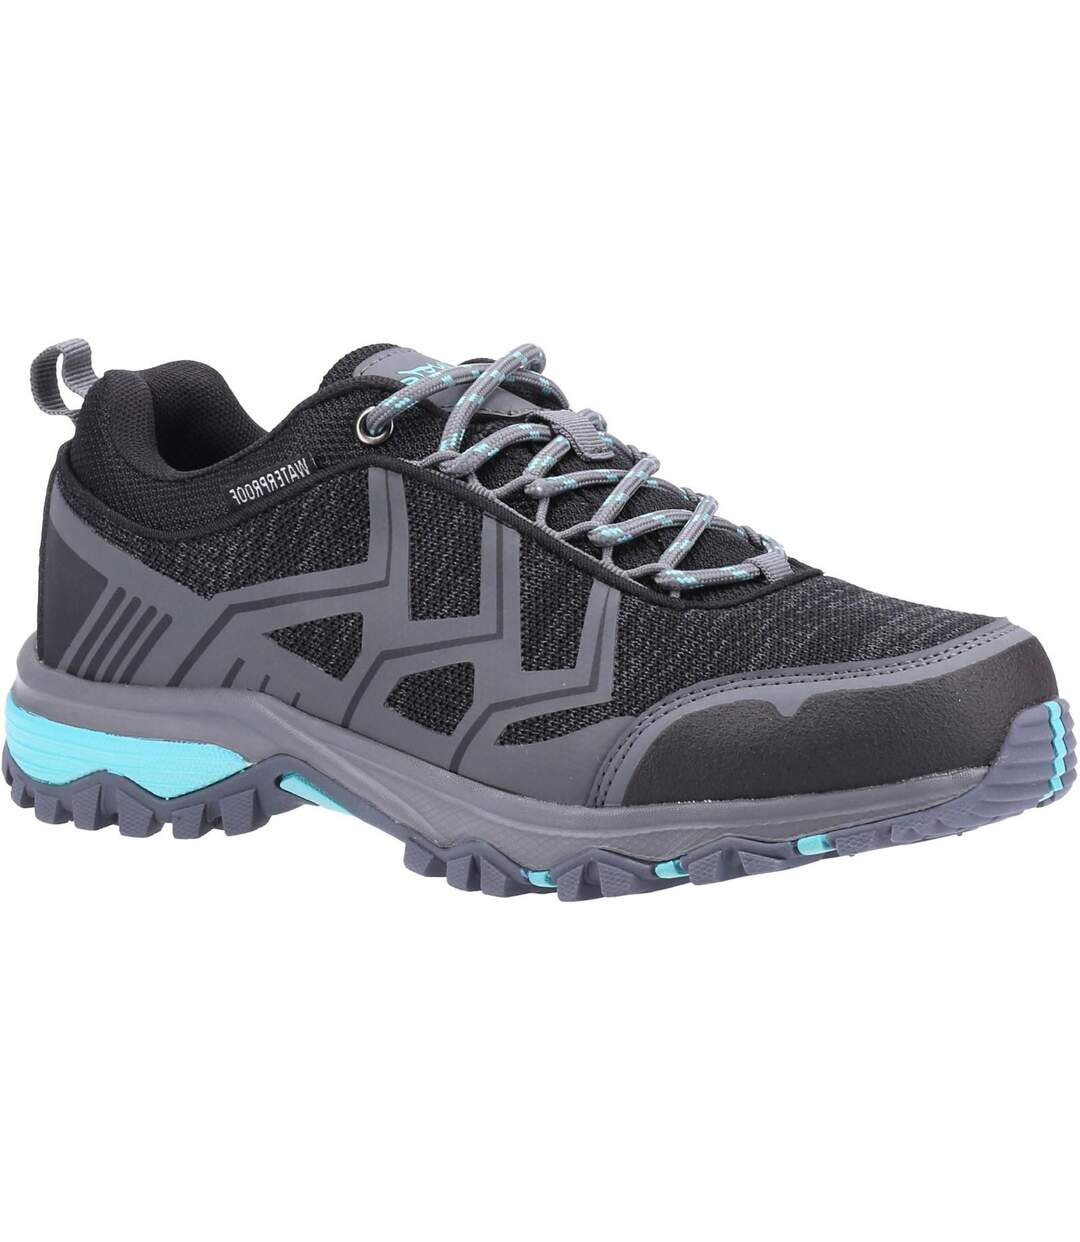 Cotswold Womens/Ladies Wychwood Low WP Hiking Shoes (Gray) - UTFS8472